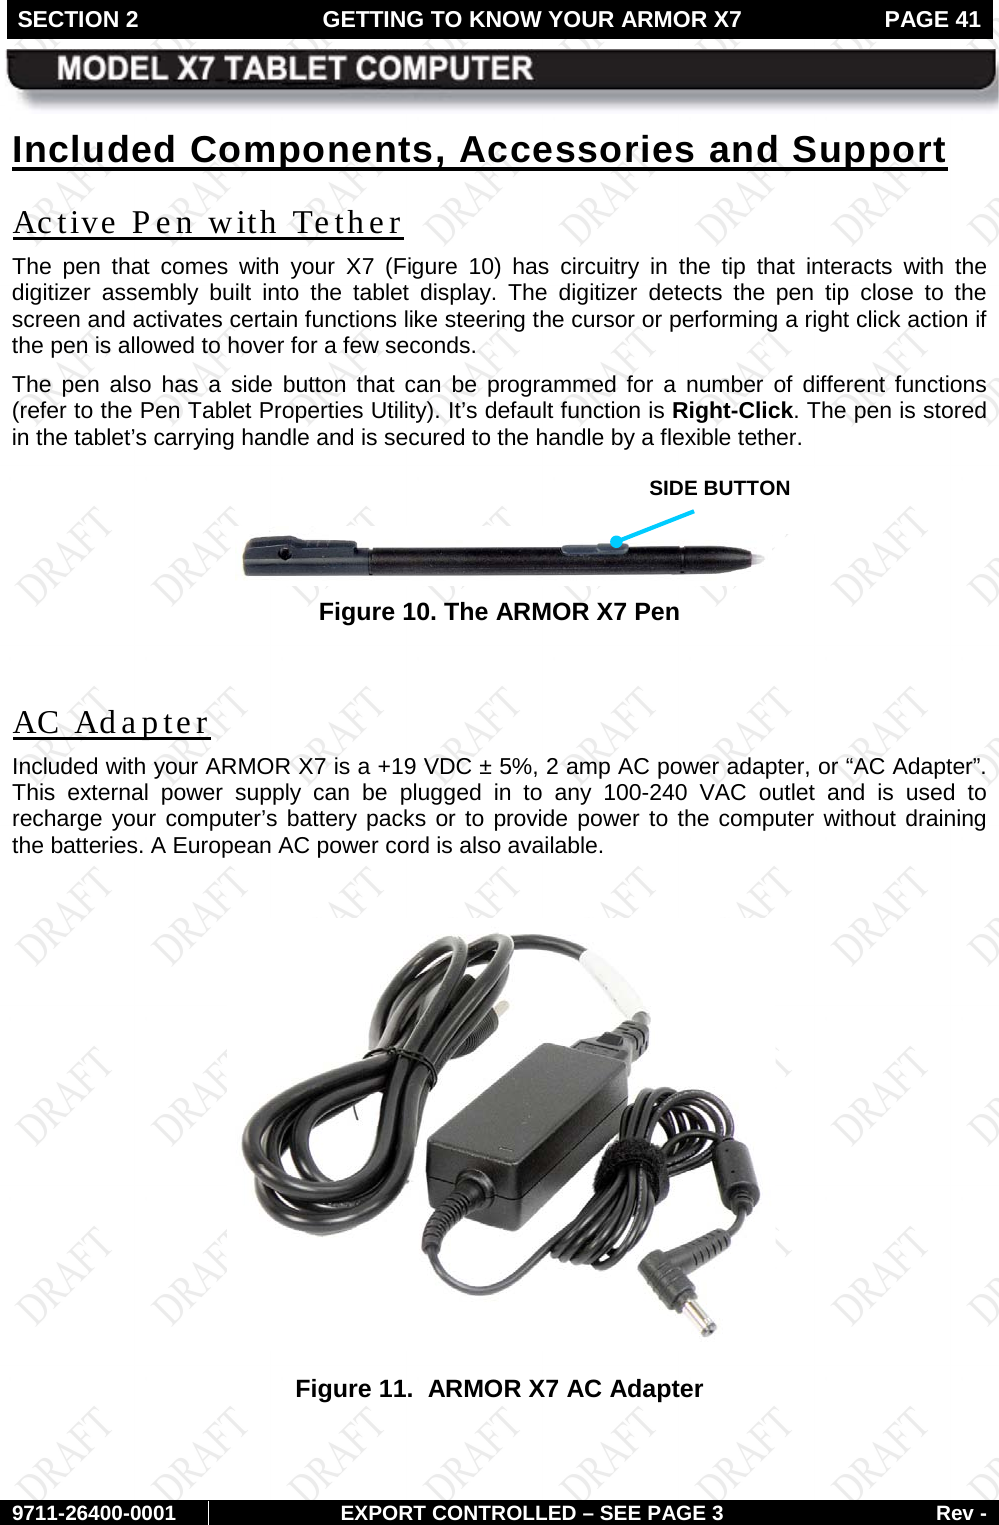 SECTION 2 GETTING TO KNOW YOUR ARMOR X7  PAGE 41        9711-26400-0001 EXPORT CONTROLLED – SEE PAGE 3 Rev - Included Components, Accessories and Support Active Pen with Tether The pen that comes with your X7  (Figure  10) has circuitry in the tip that interacts with the digitizer assembly built into the tablet display. The digitizer detects the pen tip close to the screen and activates certain functions like steering the cursor or performing a right click action if the pen is allowed to hover for a few seconds.  The pen also has a side button that can be programmed for a number of different functions (refer to the Pen Tablet Properties Utility). It’s default function is Right-Click. The pen is stored in the tablet’s carrying handle and is secured to the handle by a flexible tether.   Figure 10. The ARMOR X7 Pen  AC Adapter Included with your ARMOR X7 is a +19 VDC ± 5%, 2 amp AC power adapter, or “AC Adapter”. This external power supply can be plugged in to any 100-240 VAC outlet and is used to recharge your computer’s battery packs or to provide power to the computer without draining the batteries. A European AC power cord is also available.   Figure 11.  ARMOR X7 AC Adapter   SIDE BUTTON 